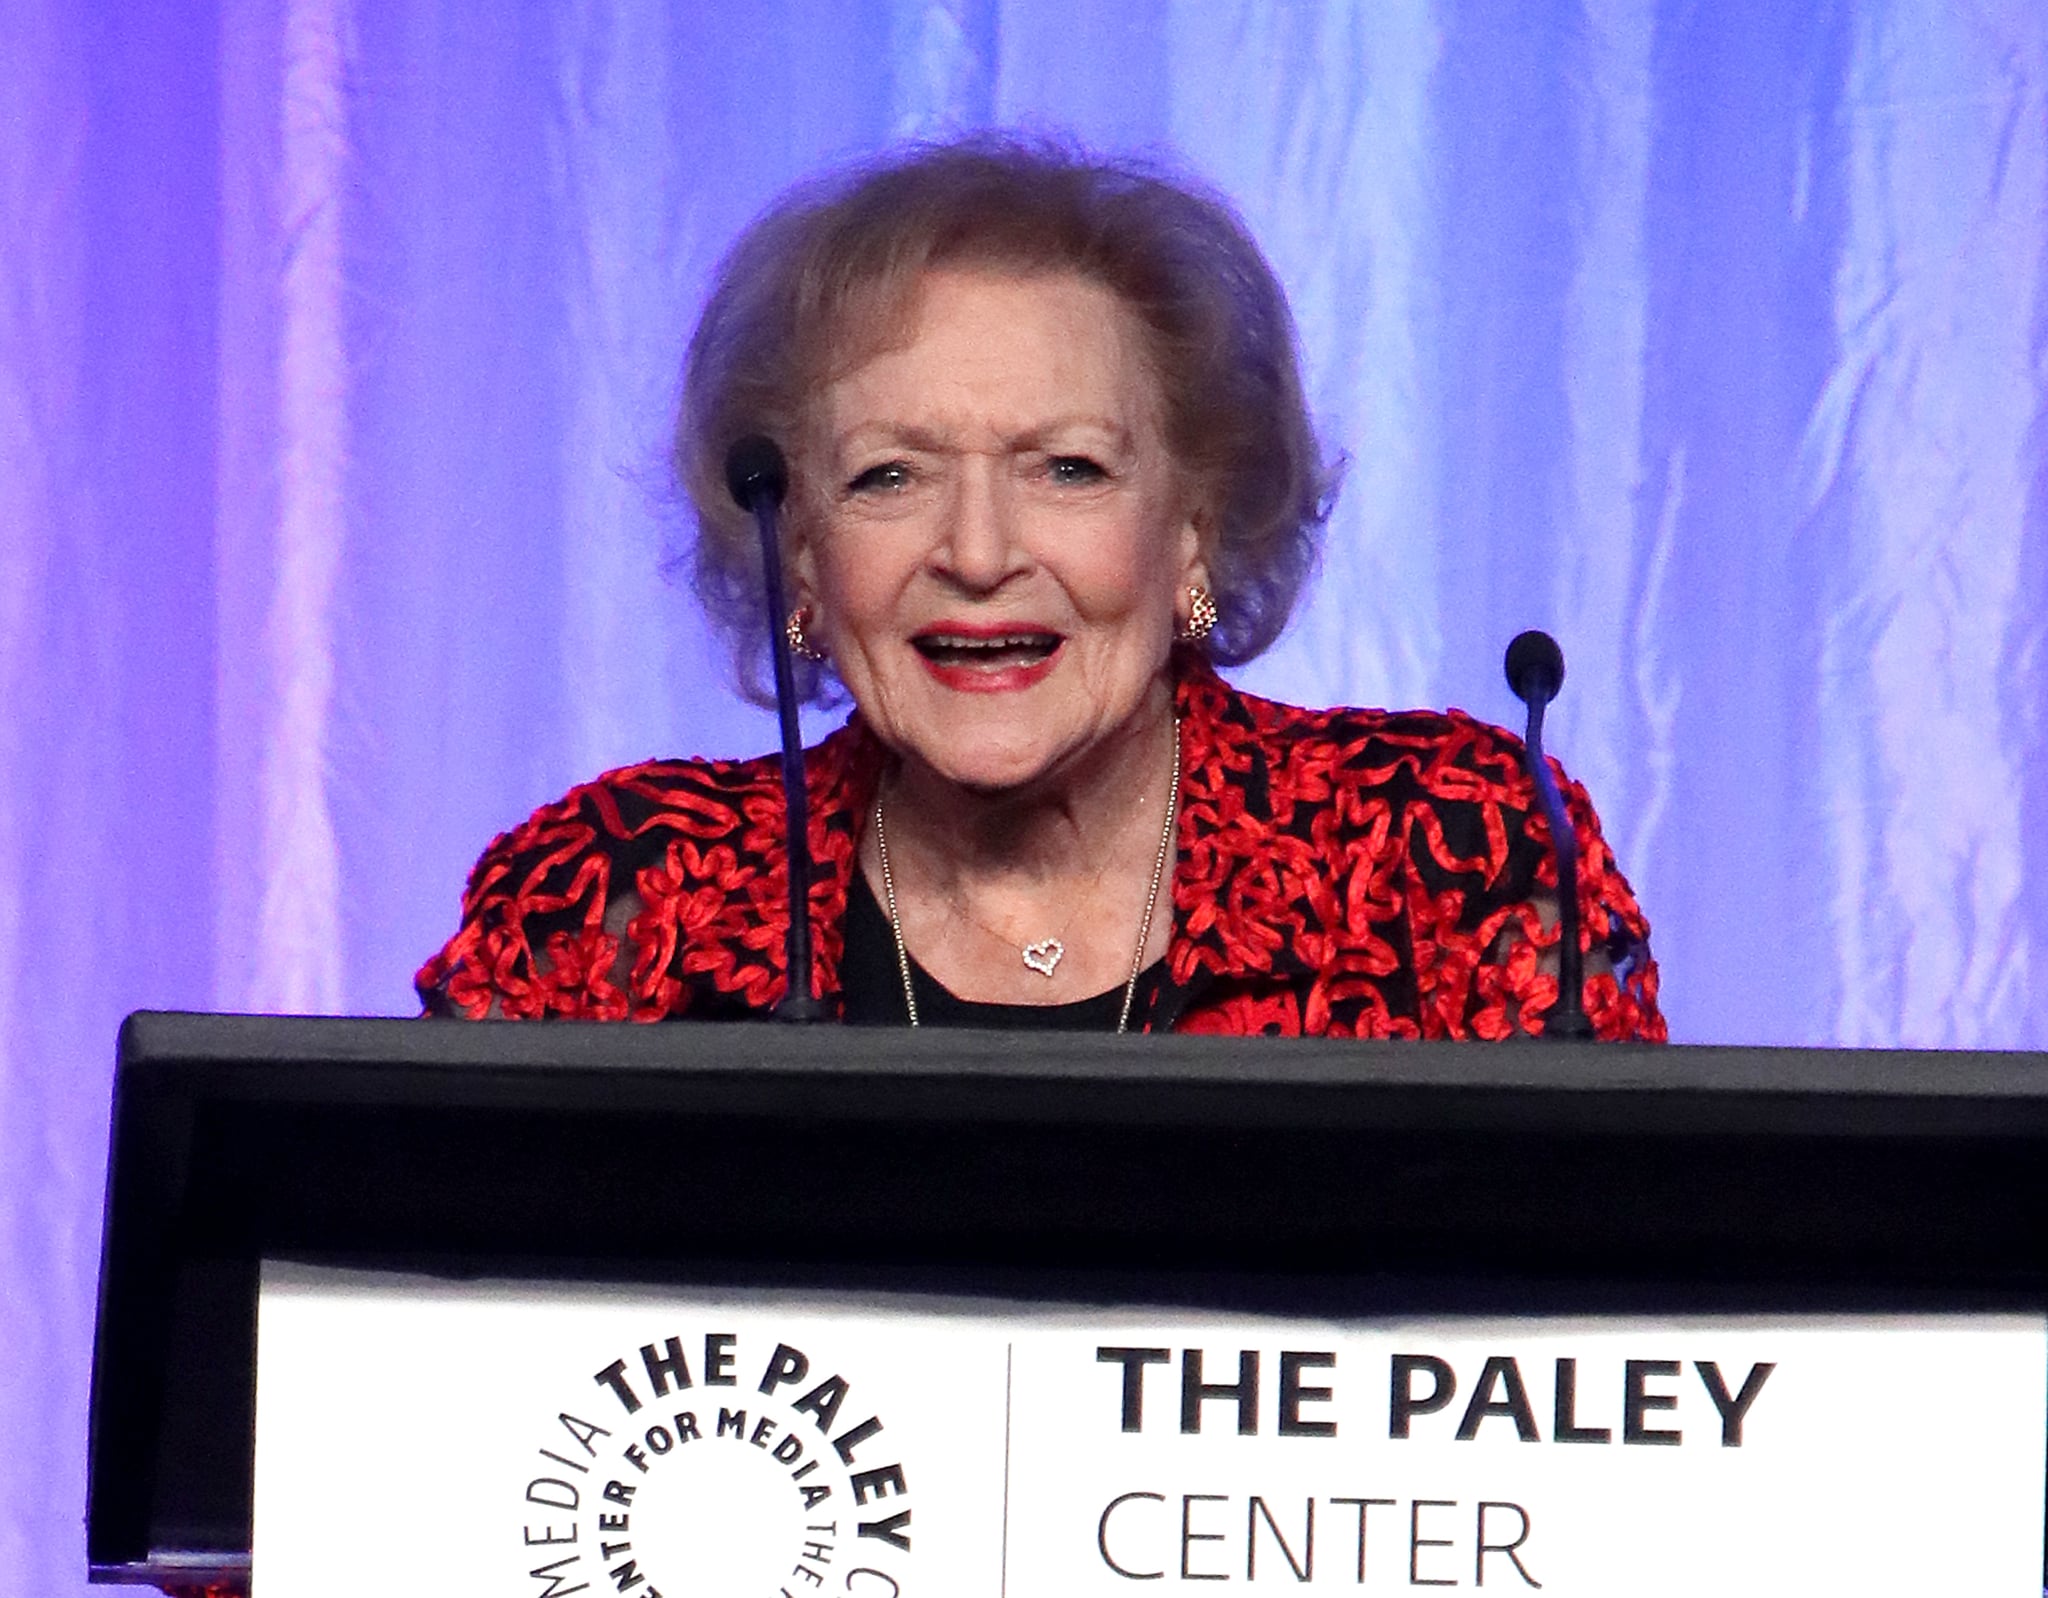 BEVERLY HILLS, CA - OCTOBER 12:  Actress Betty White speaks at Paley Honours in Hollywood: A Gala Celebrating Women in Television at the Beverly Wilshire Four Seasons Hotel on October 12, 2017 in Beverly Hills, California.  (Photo by David Livingston/Getty Images)